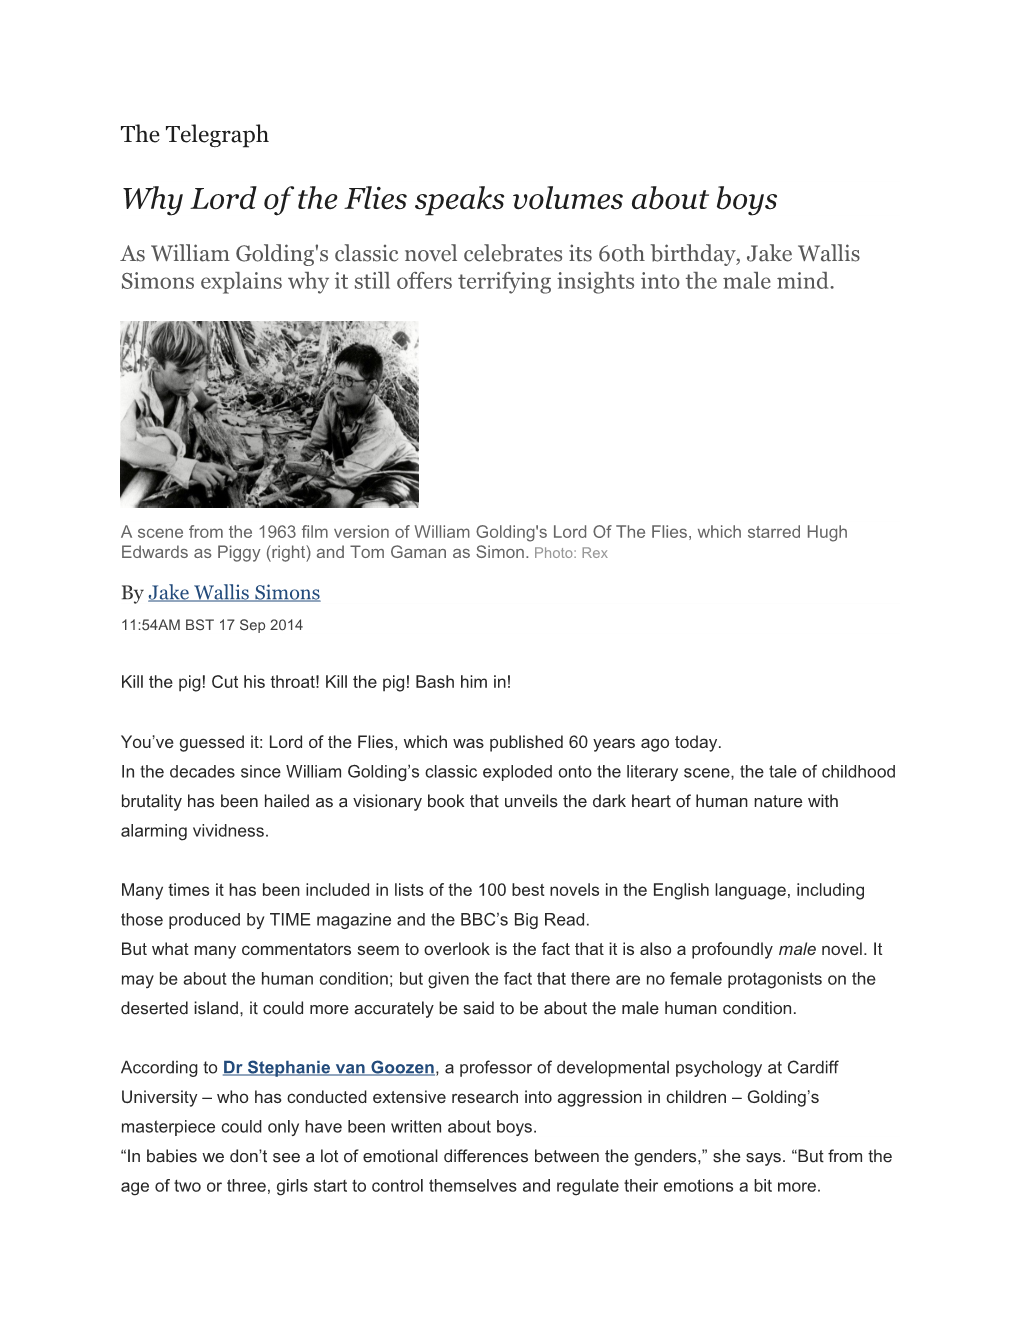 Why Lord of the Flies Speaks Volumes About Boys